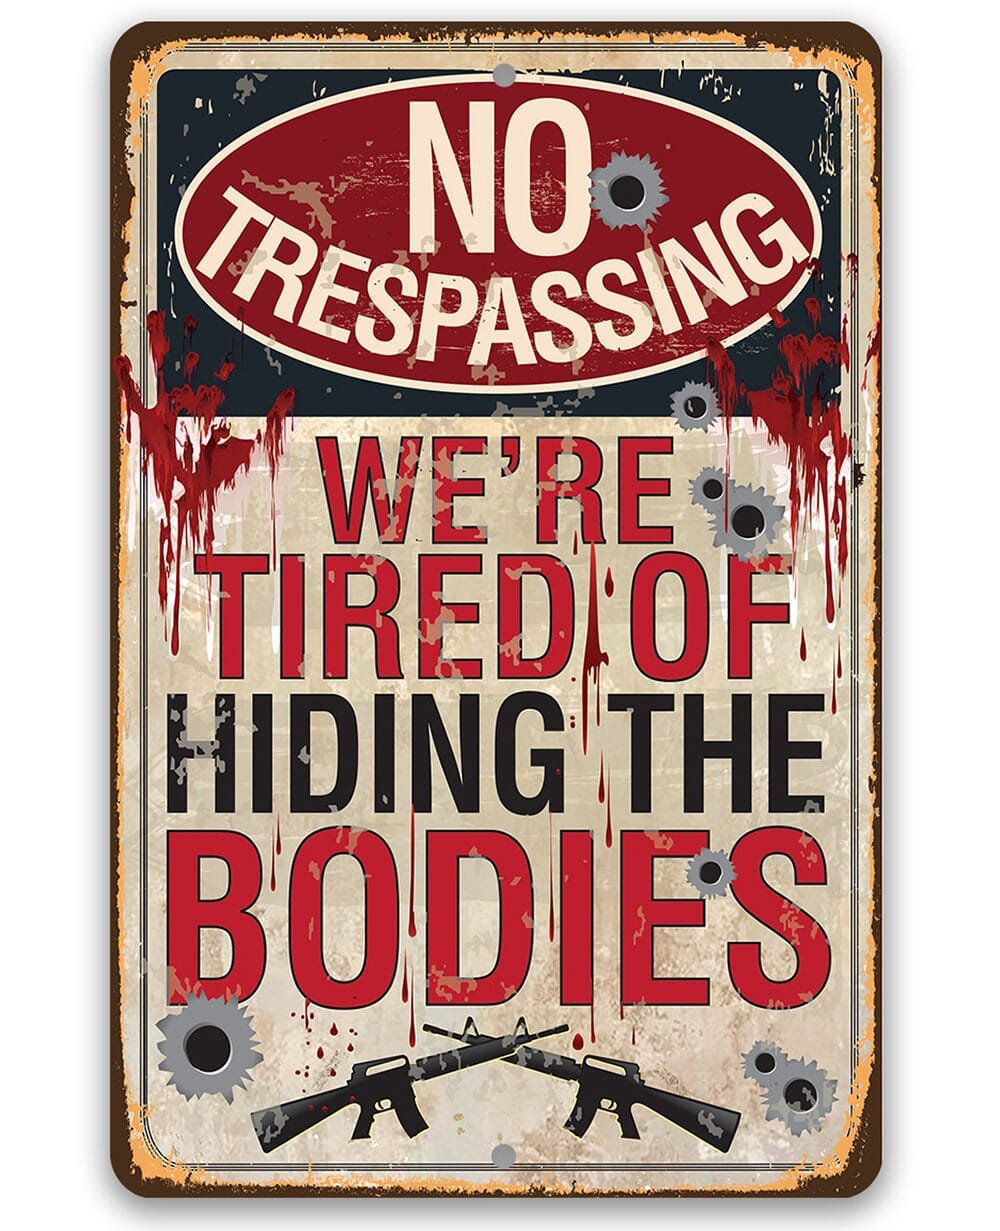 No Trespassing Tired of Hiding The Bodies-Fence, Bullet Hole, Gift for Gun Enthusiast, 8" x 12"/12" x 18" Aluminum Tin Awesome Metal Poster Lone Star Art 